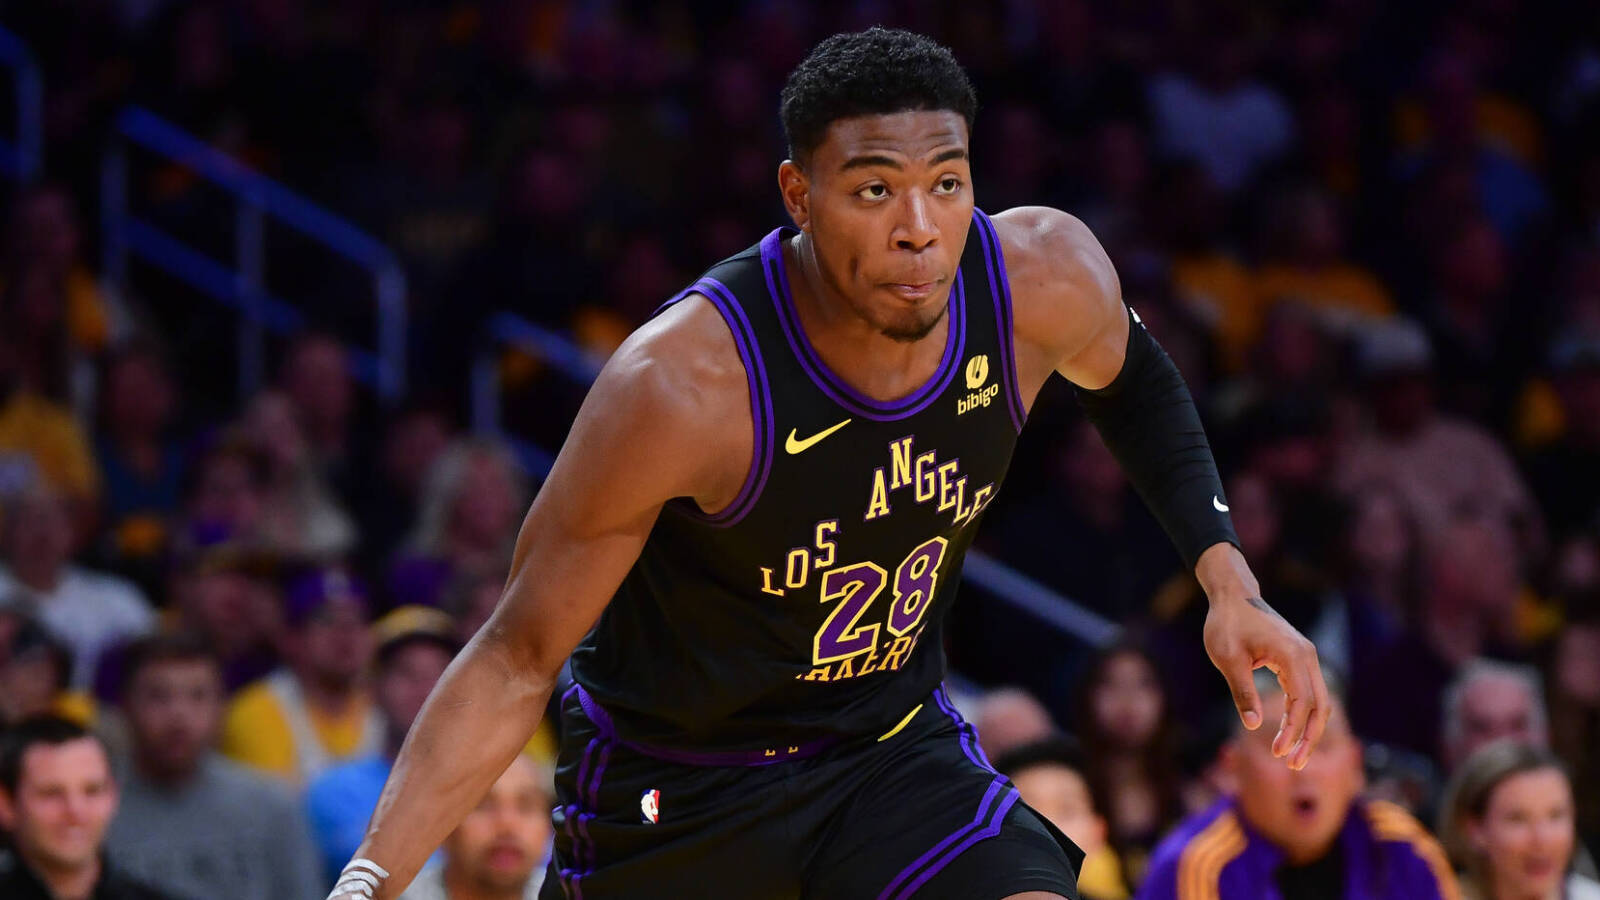 Lakers forward undergoes surgery for nasal fracture